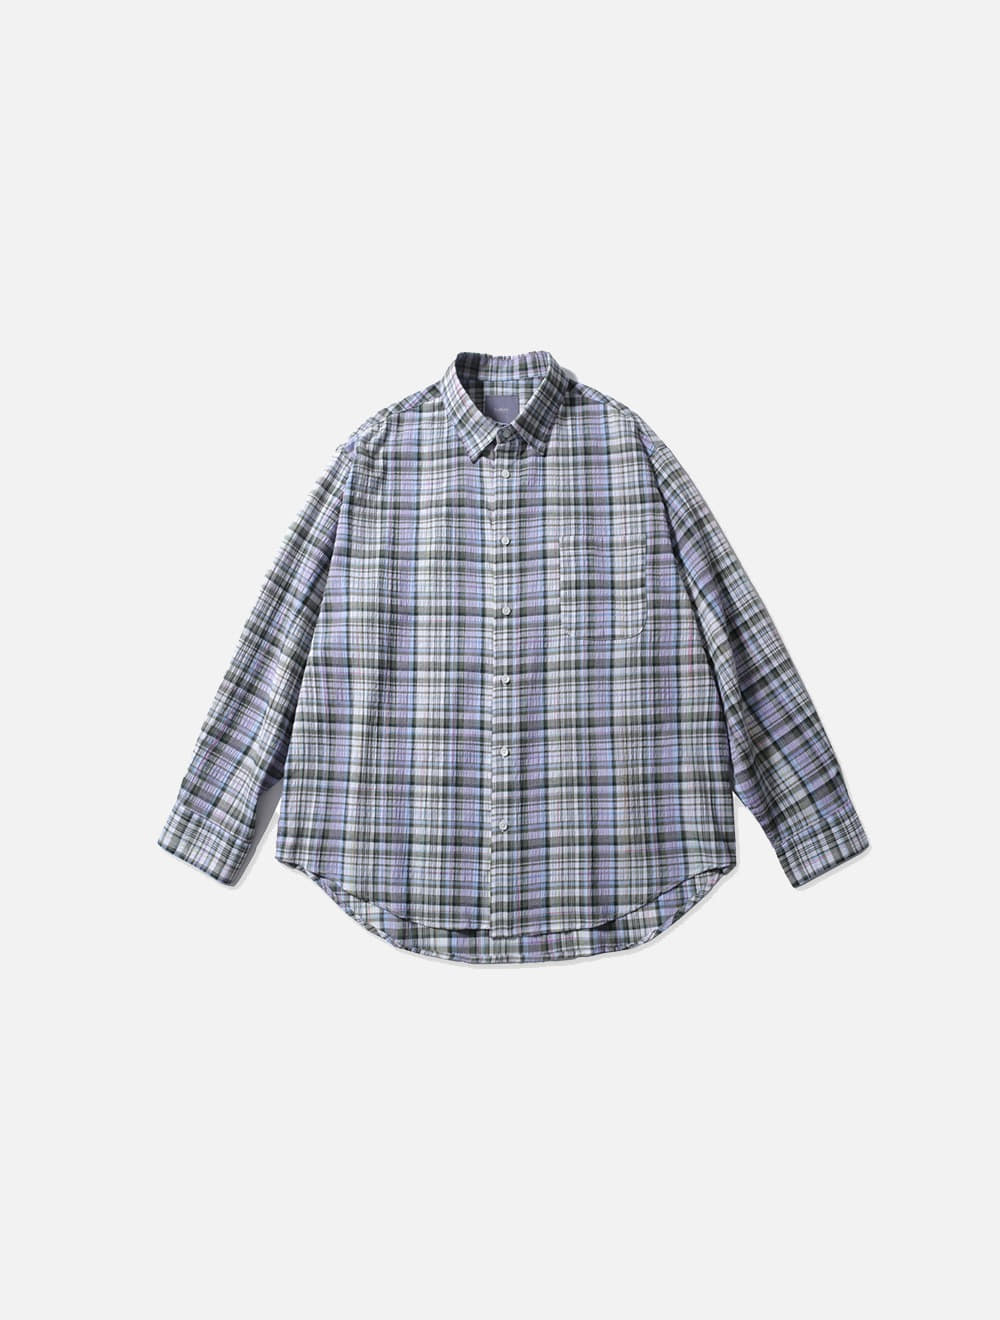 ALL WEATHER OVER SILHOUETTE SHIRT (MULTICOLOR CHECK #1)